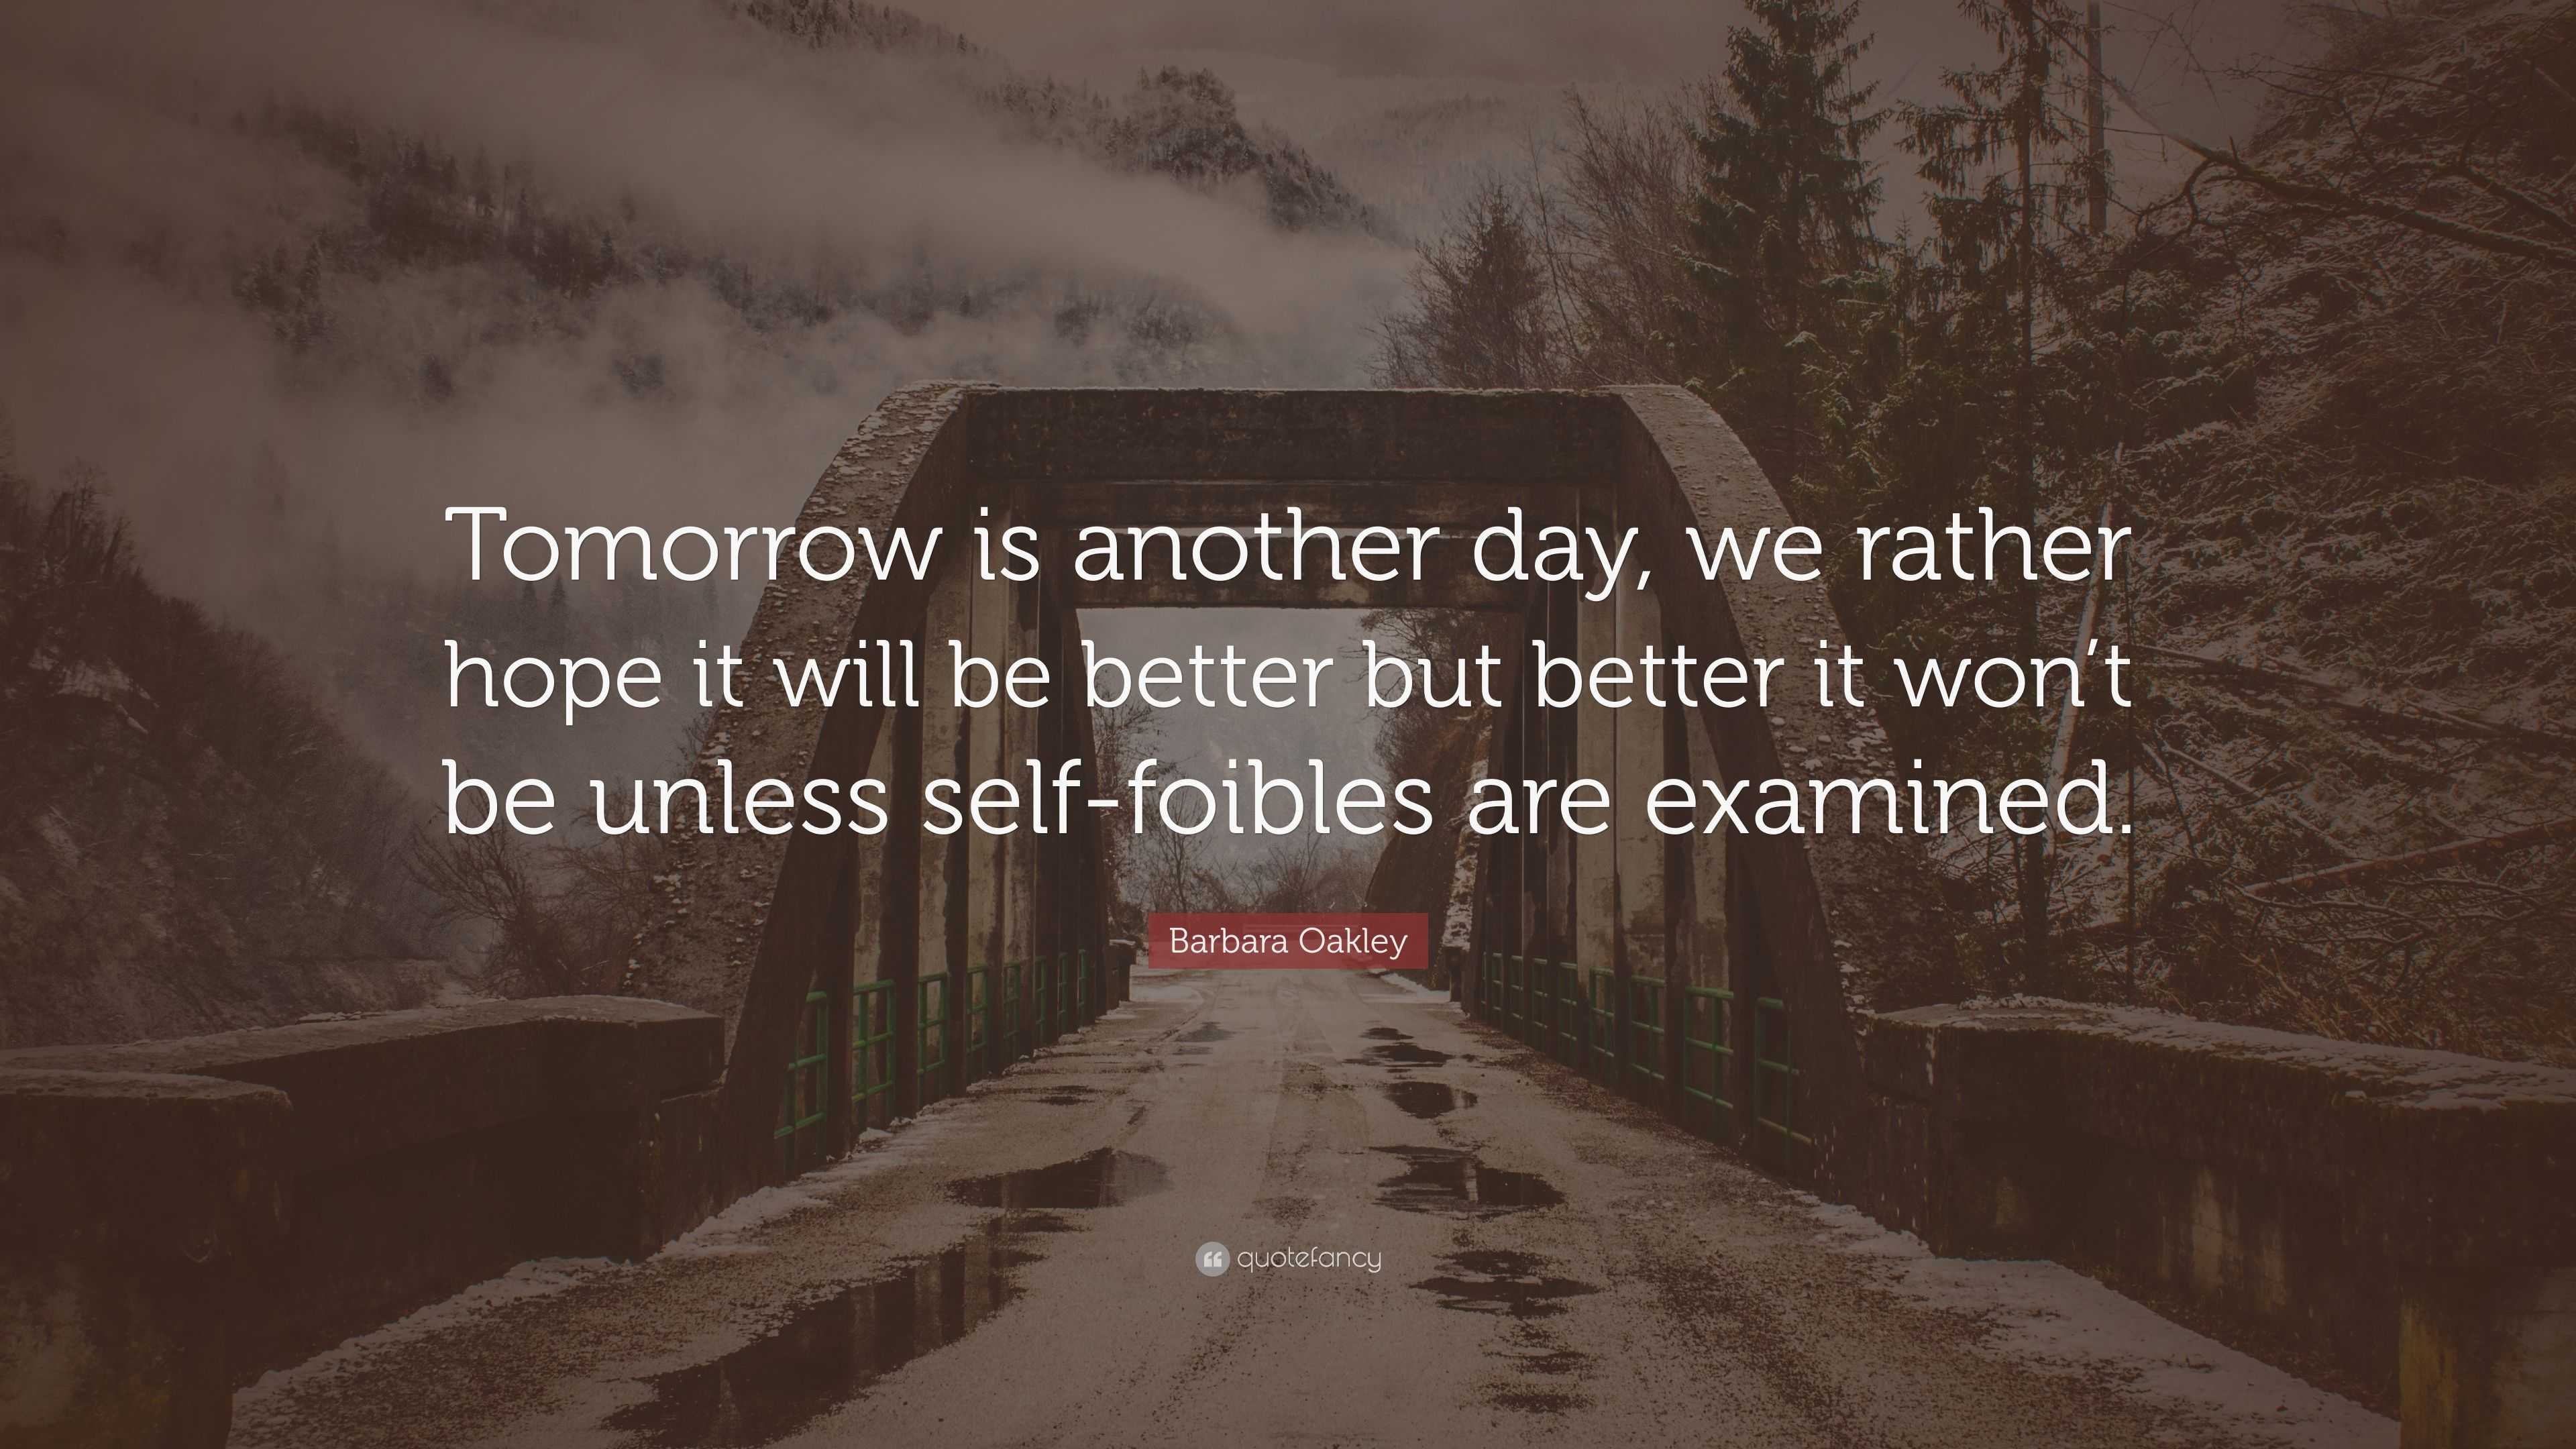 Barbara Oakley Quote: “Tomorrow is another day, we rather hope it will ...